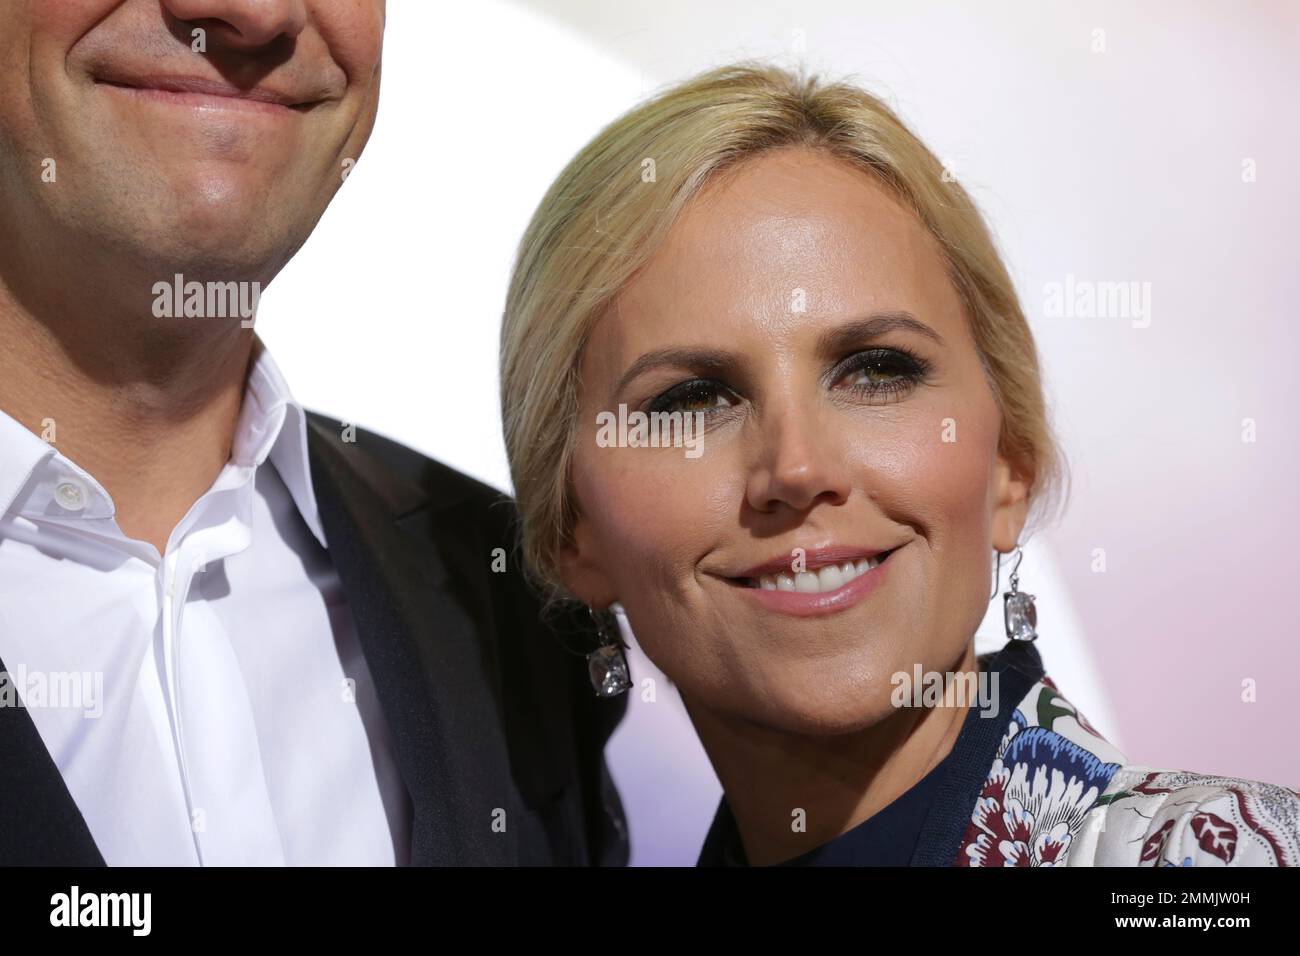 Designer/CEO of Tory Burch, Tory Burch attends the BoF 500 Gala held at One  Hotel Brooklyn Bridge during New York Fashion Week on Sunday, Sept. 9,  2018, in New York. (Photo by